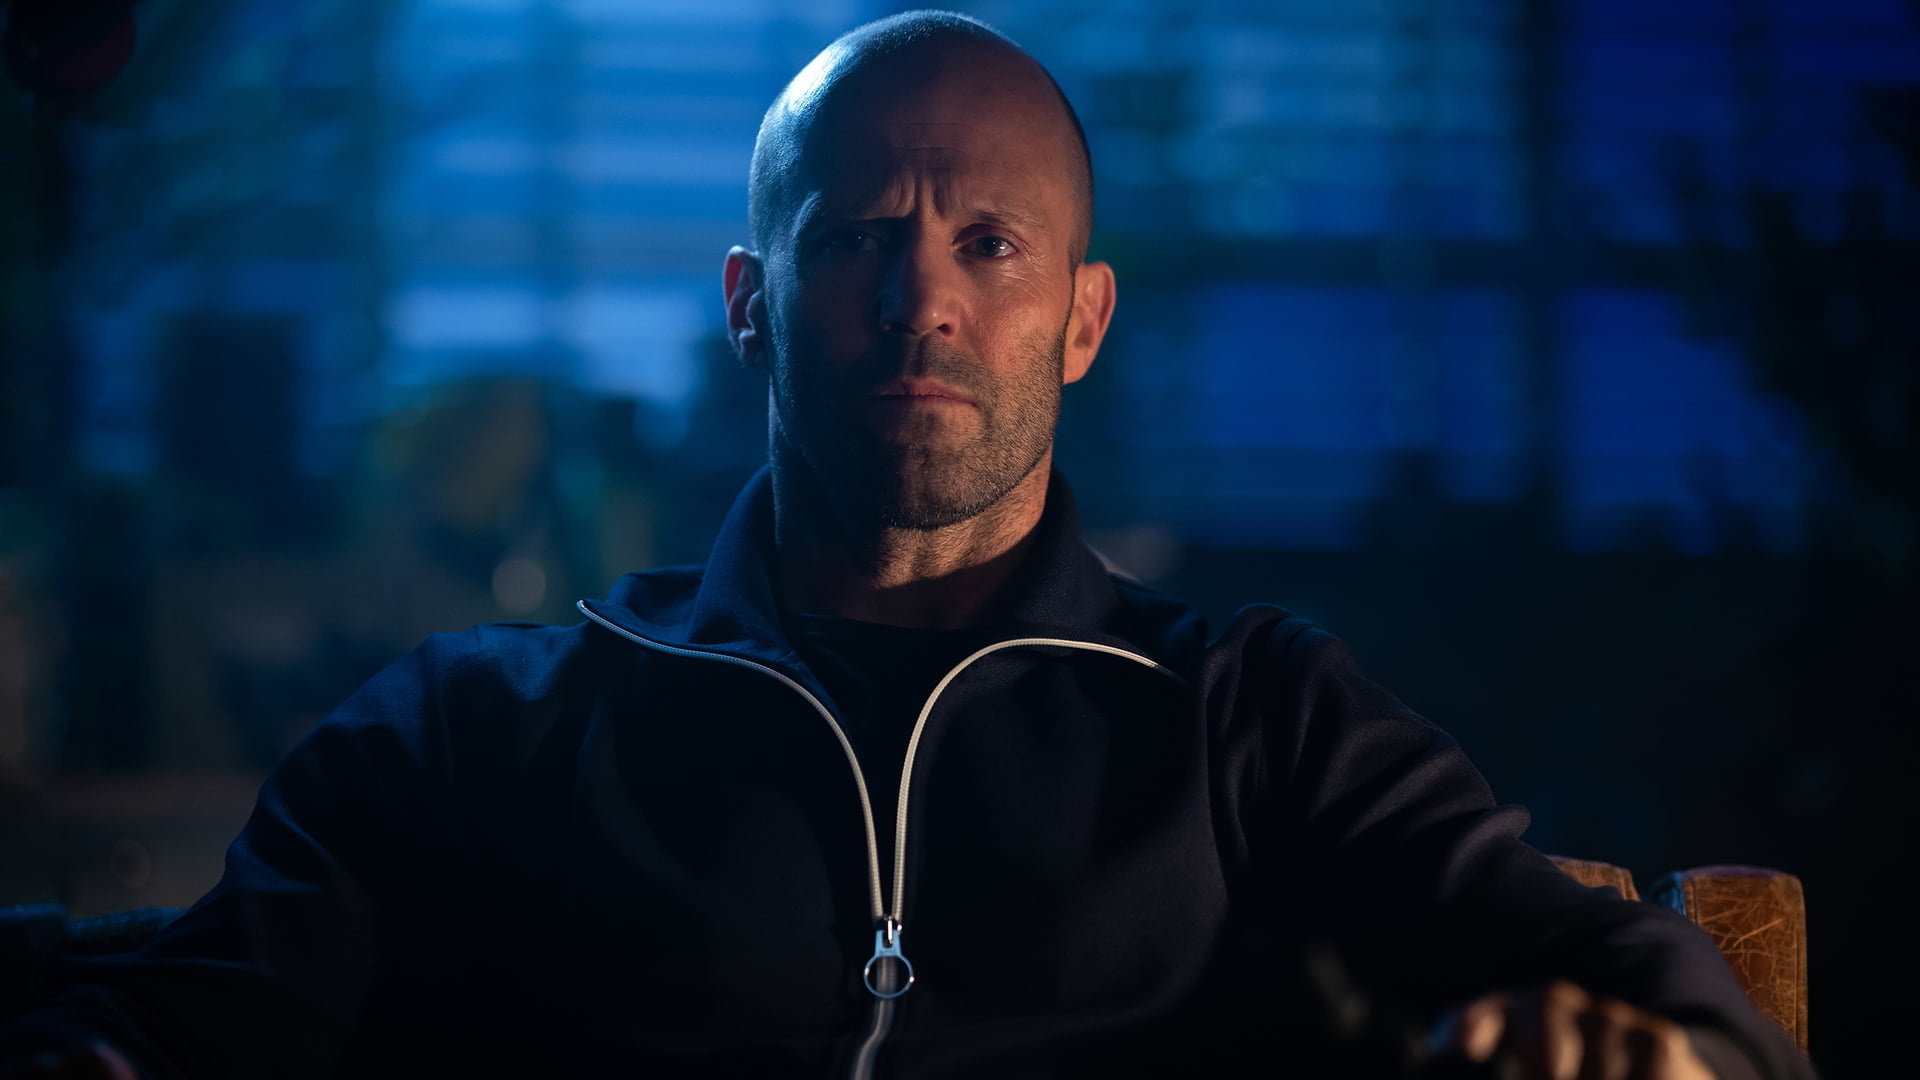 Wrath of Man: Guy Ritchie's fourth directorial collaboration with lead actor Jason Statham. 1920x1080 Full HD Wallpaper.